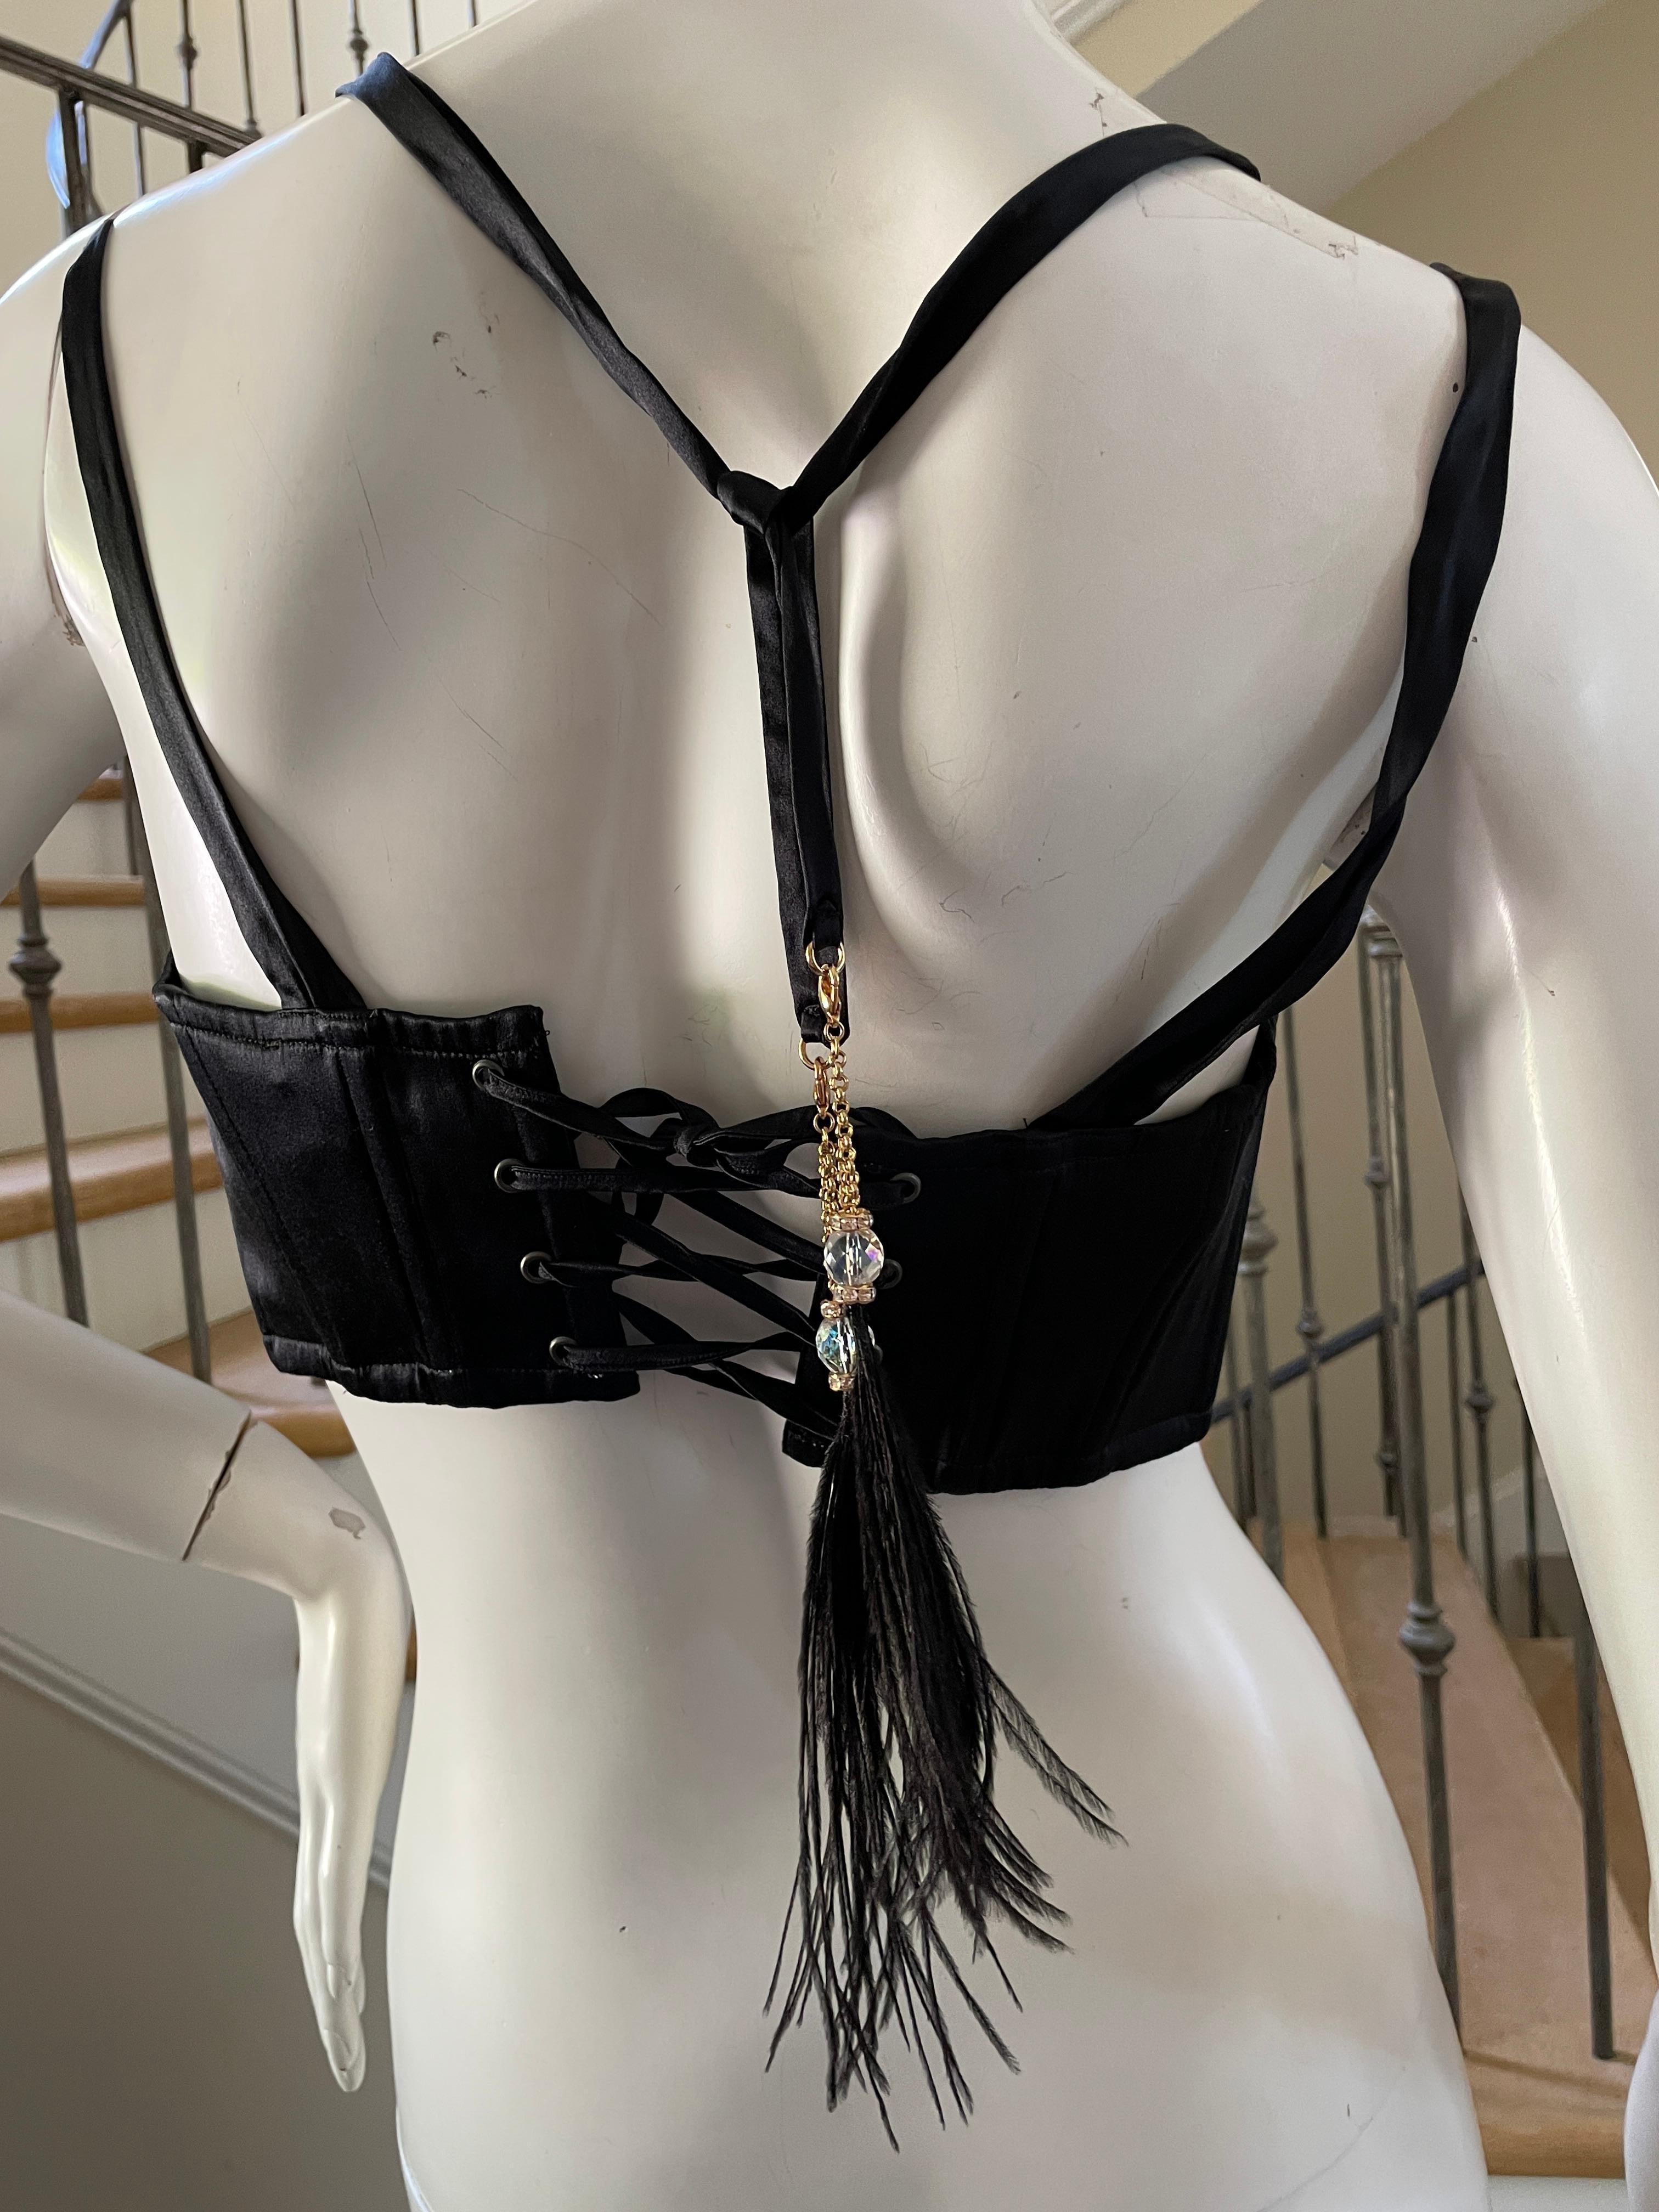 Women's Roberto Cavalli Vintage Black Corset Laced Bustier with Bead and Feather Details For Sale